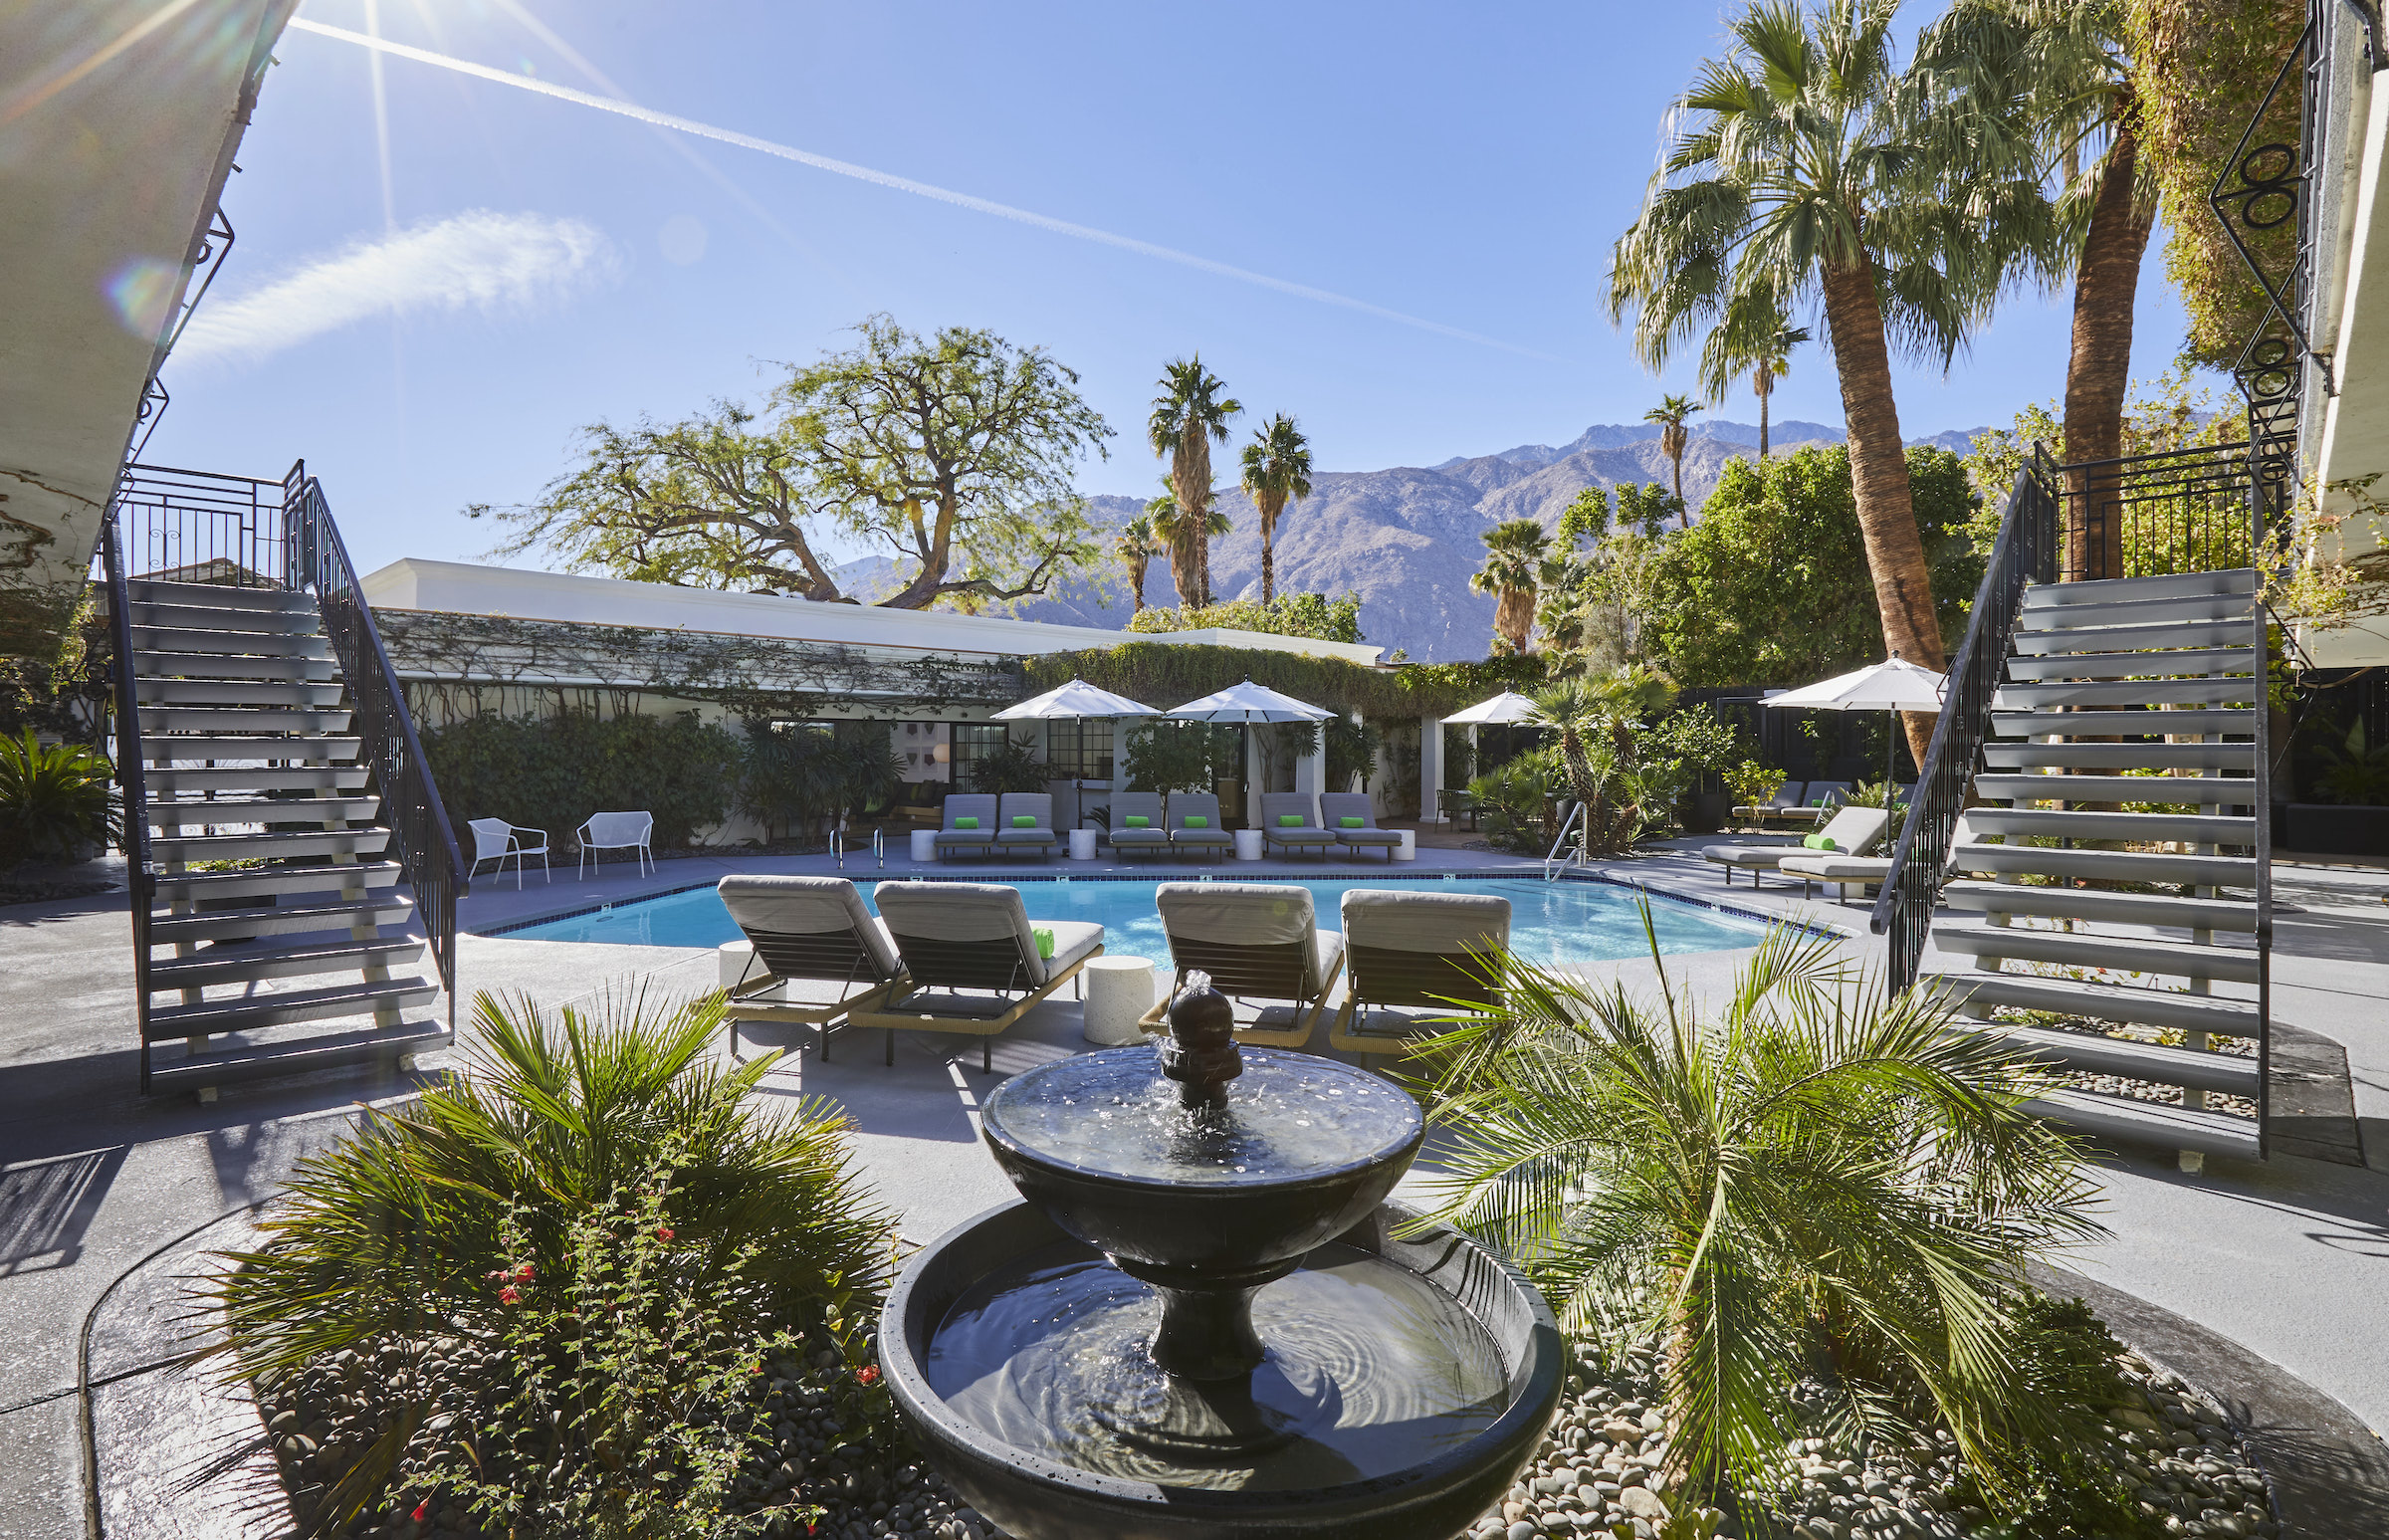 A fountain with bubbling water helps keep the pool area at Descanso Resort in Palm Springs calm and serene